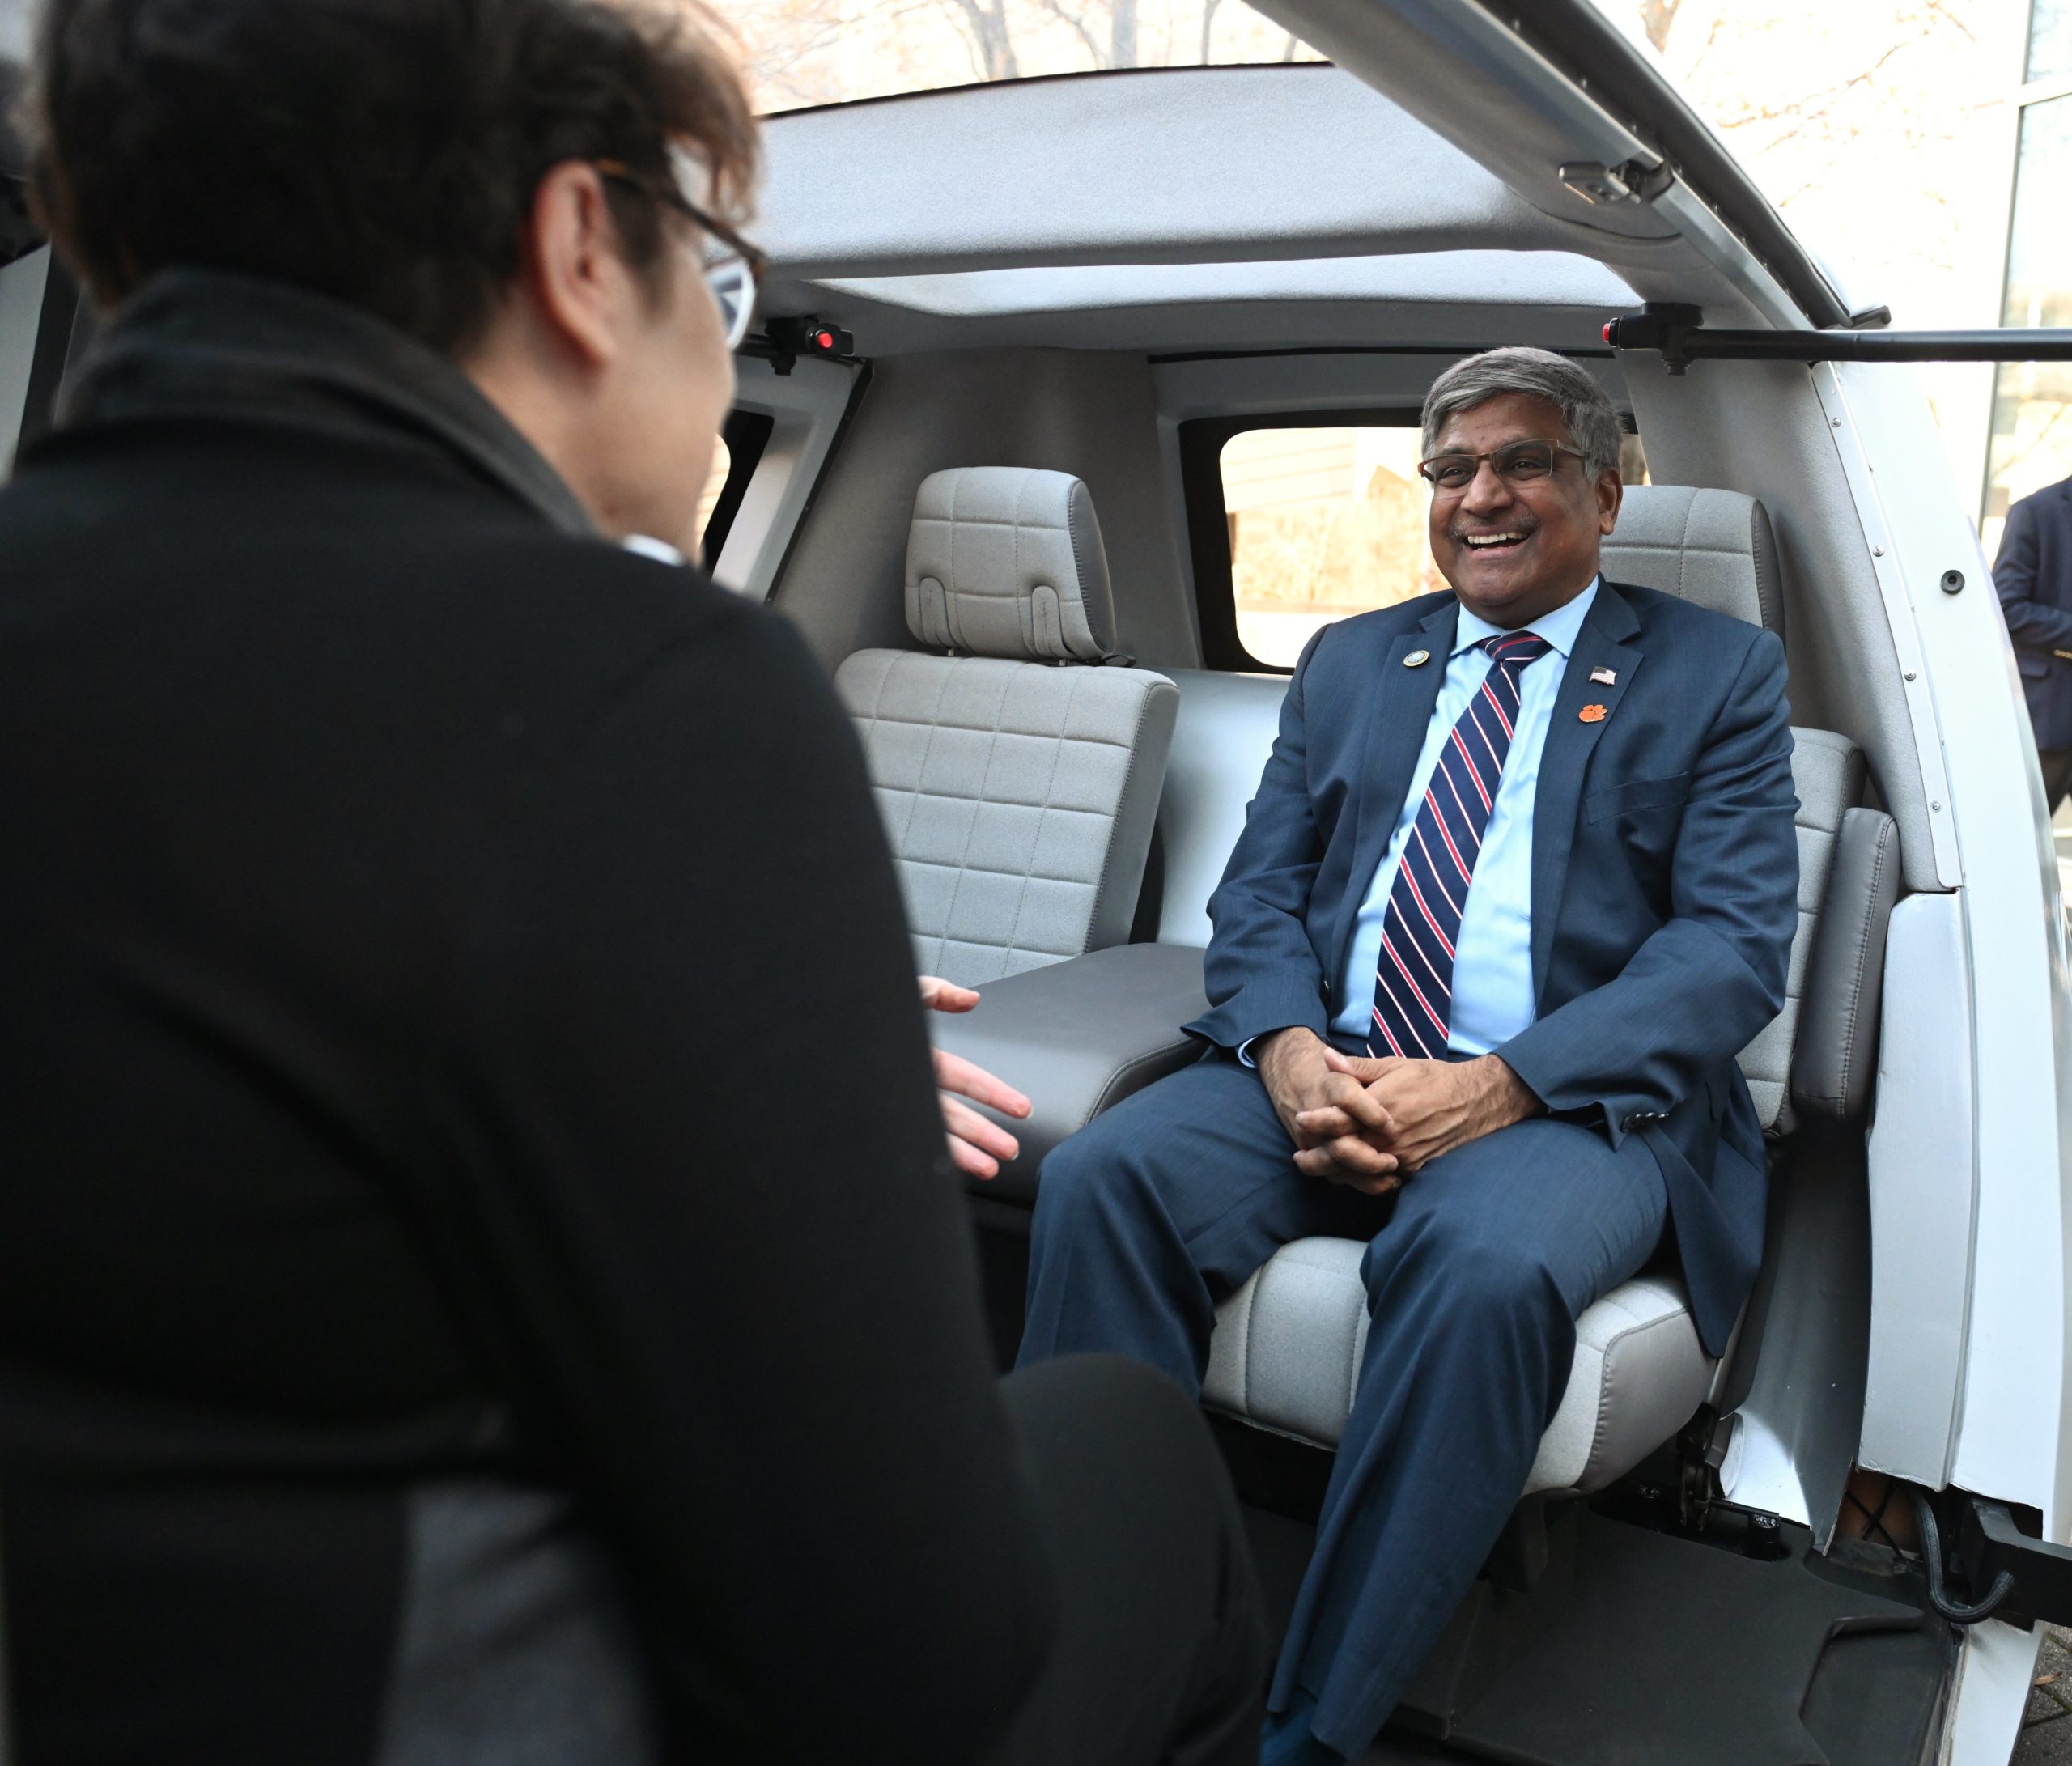 The NSF director is sitting inside an electric vehicle at the CU-ICAR campus.